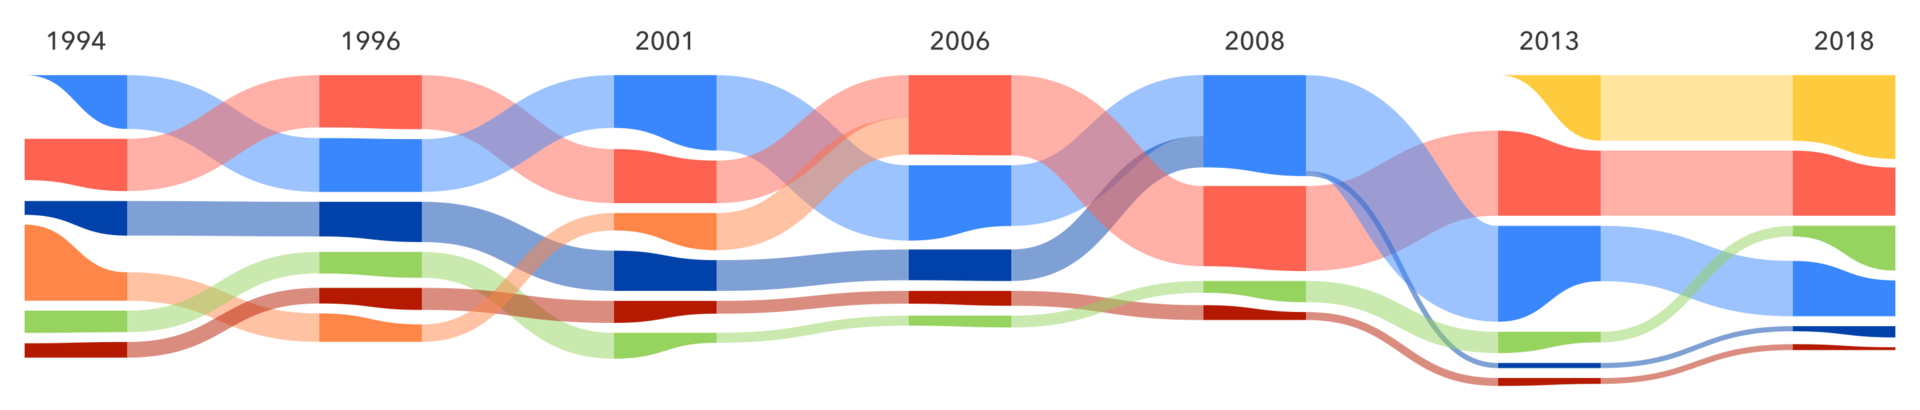 1920px-Italian_Elections_1994-2018.png